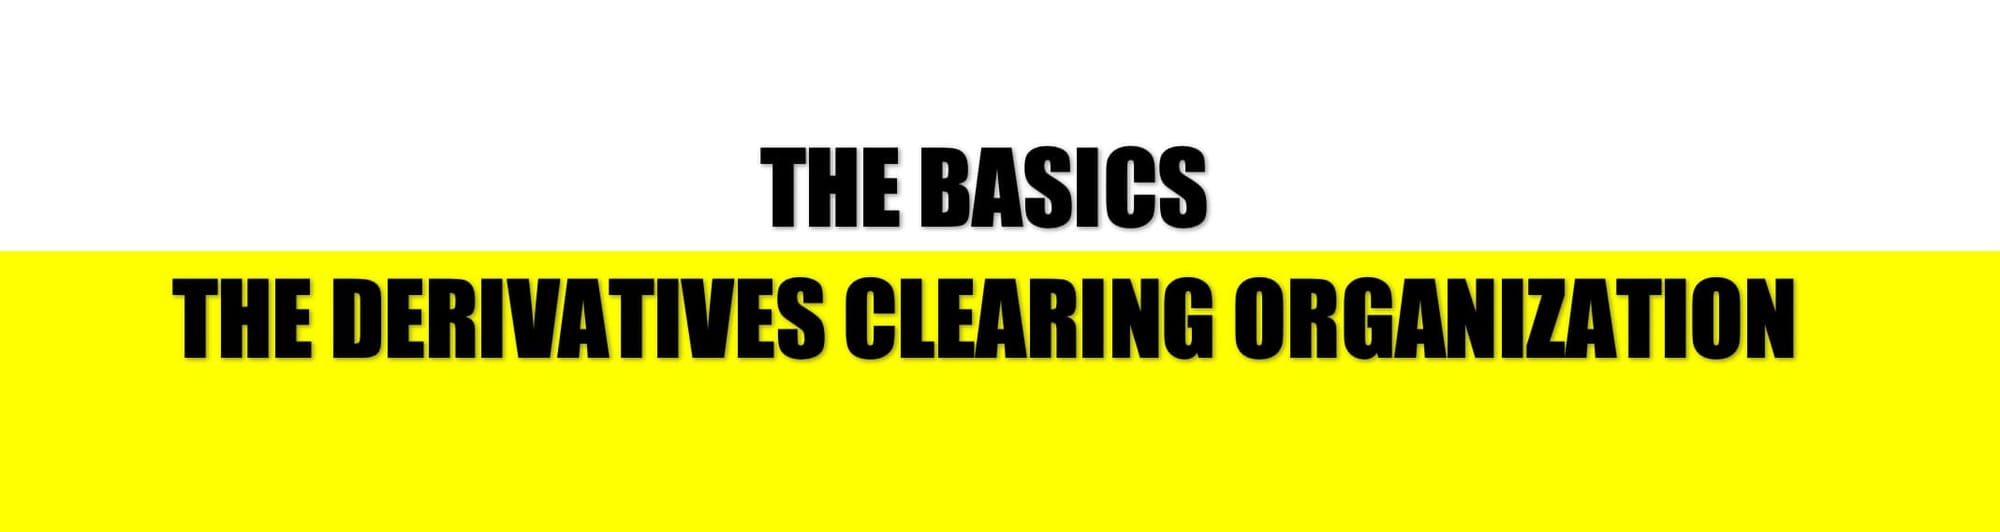 HEADER - THE BASIC / THE DERIVATIVES CLEARING ORGANISIATION